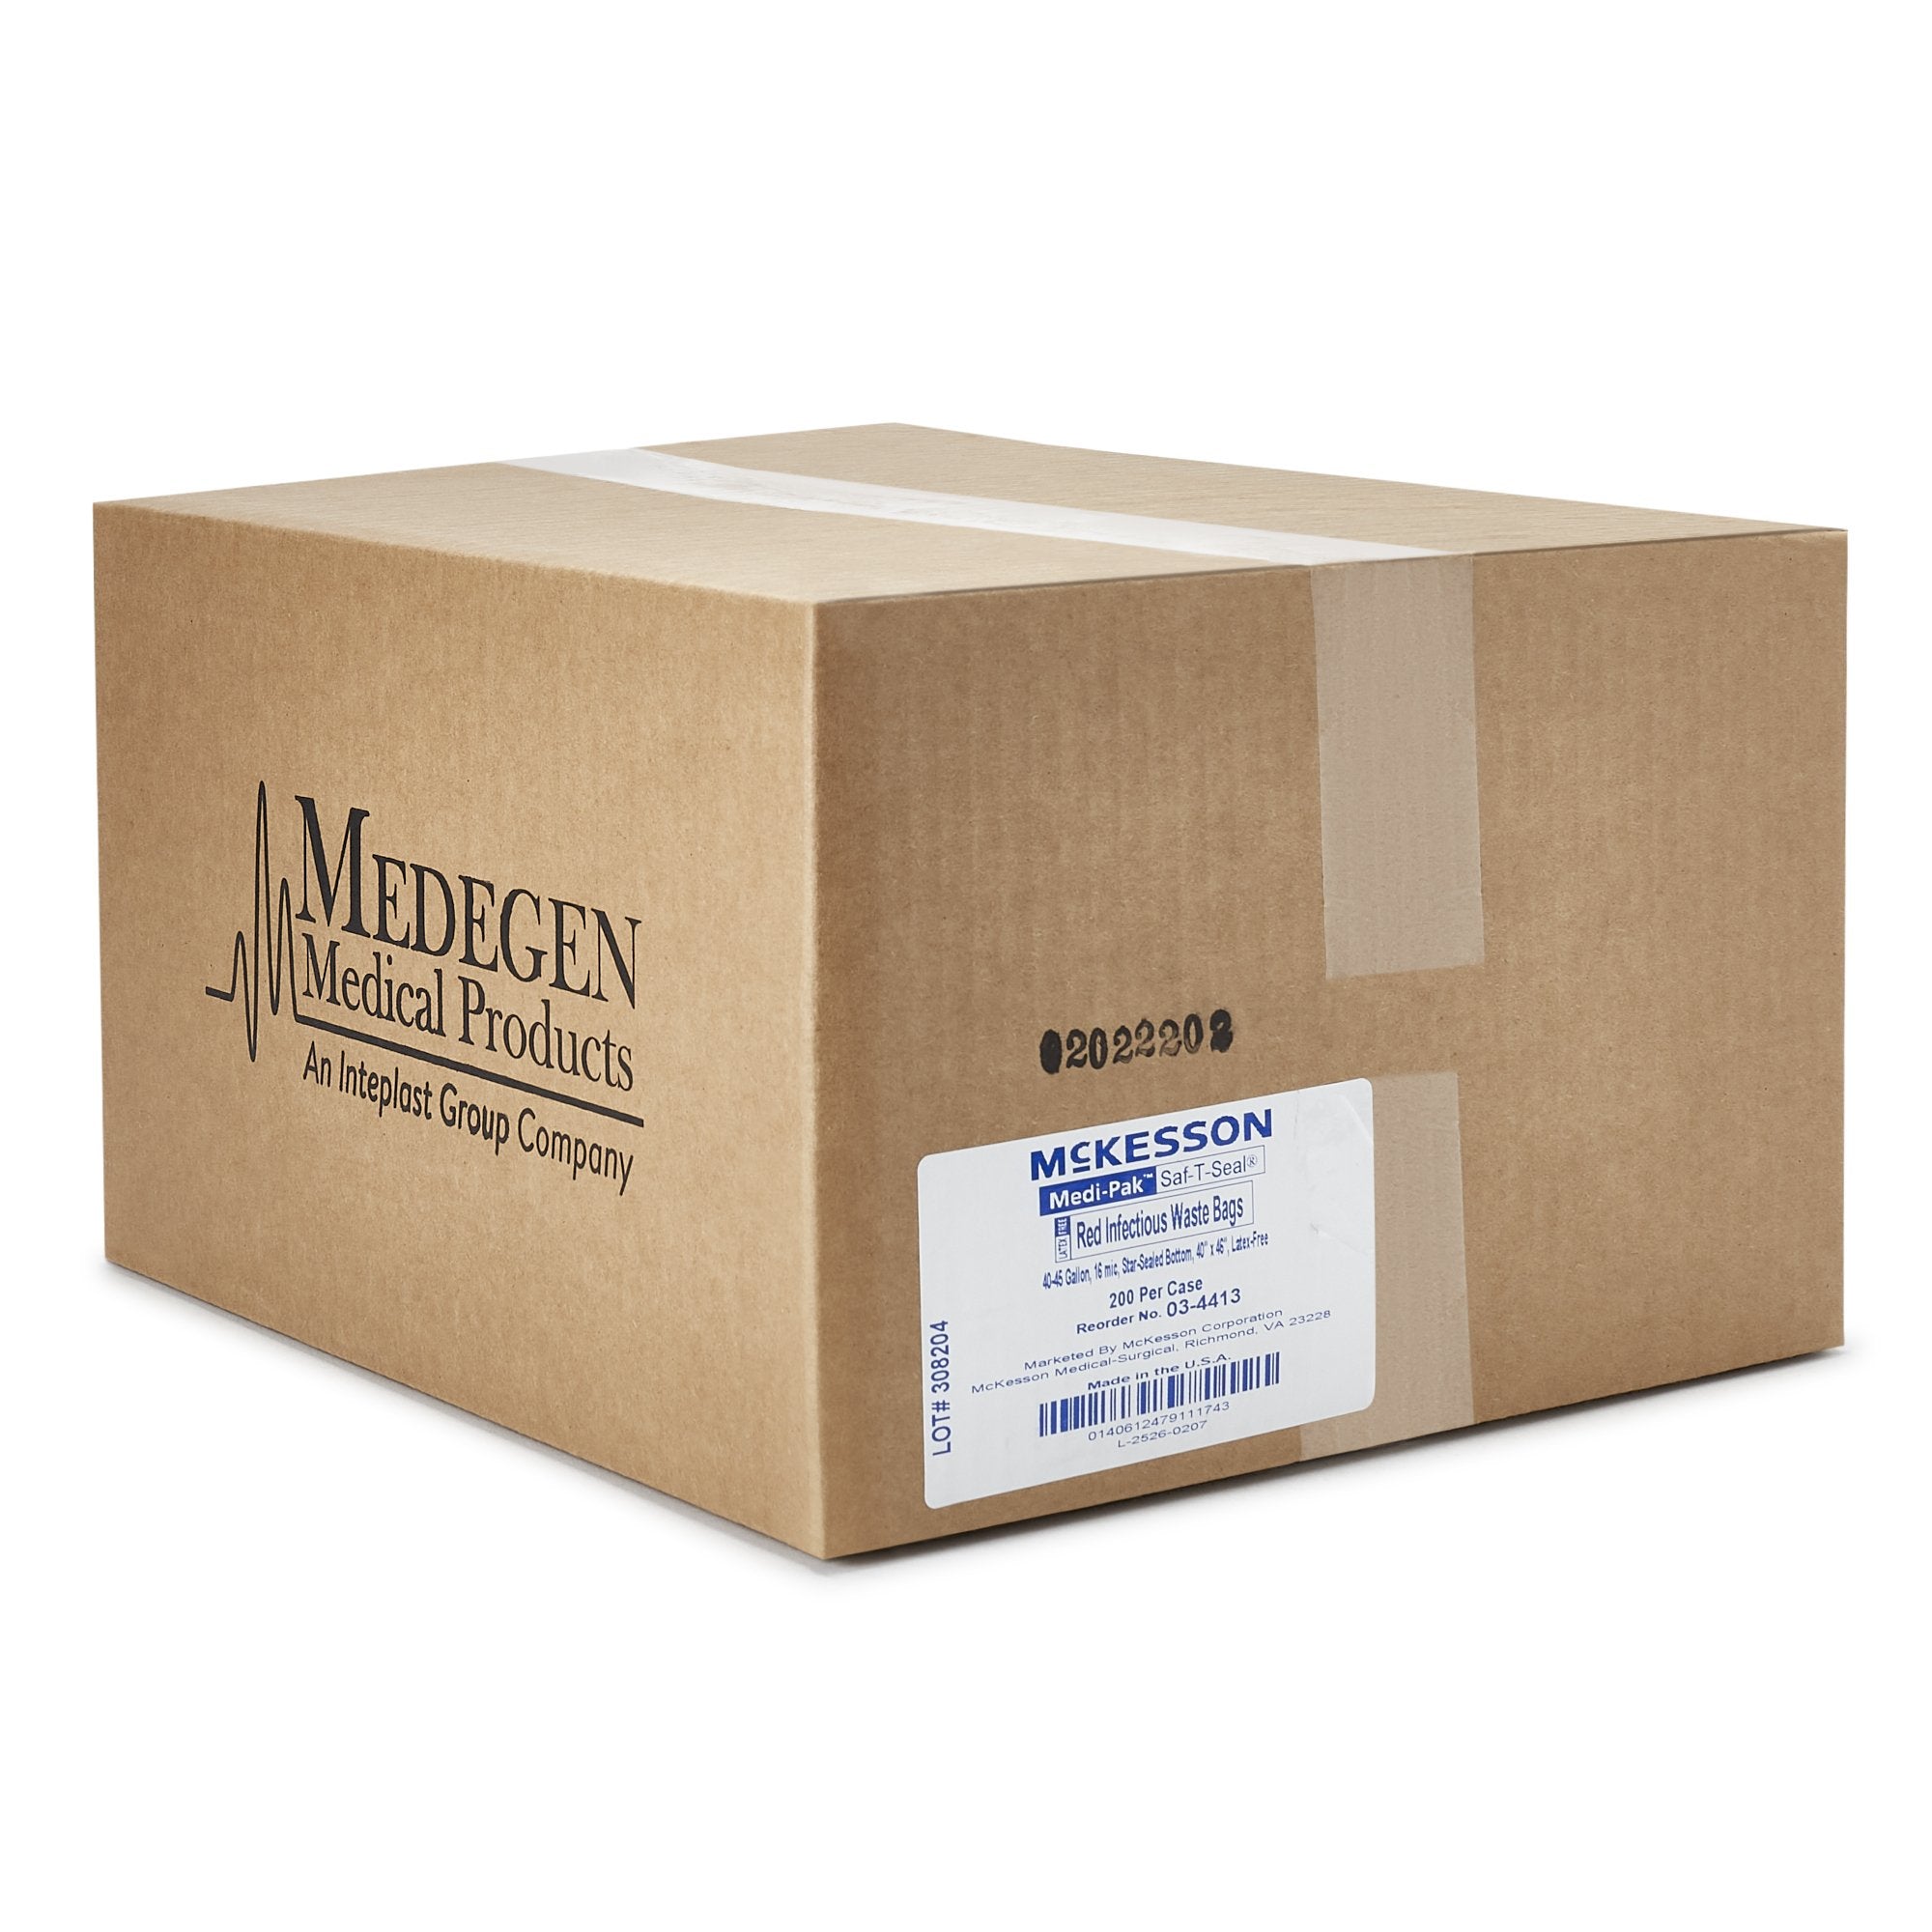 Infectious Waste Bag McKesson 40 to 45 gal. Red Bag Polymer Film 40 X 46 Inch